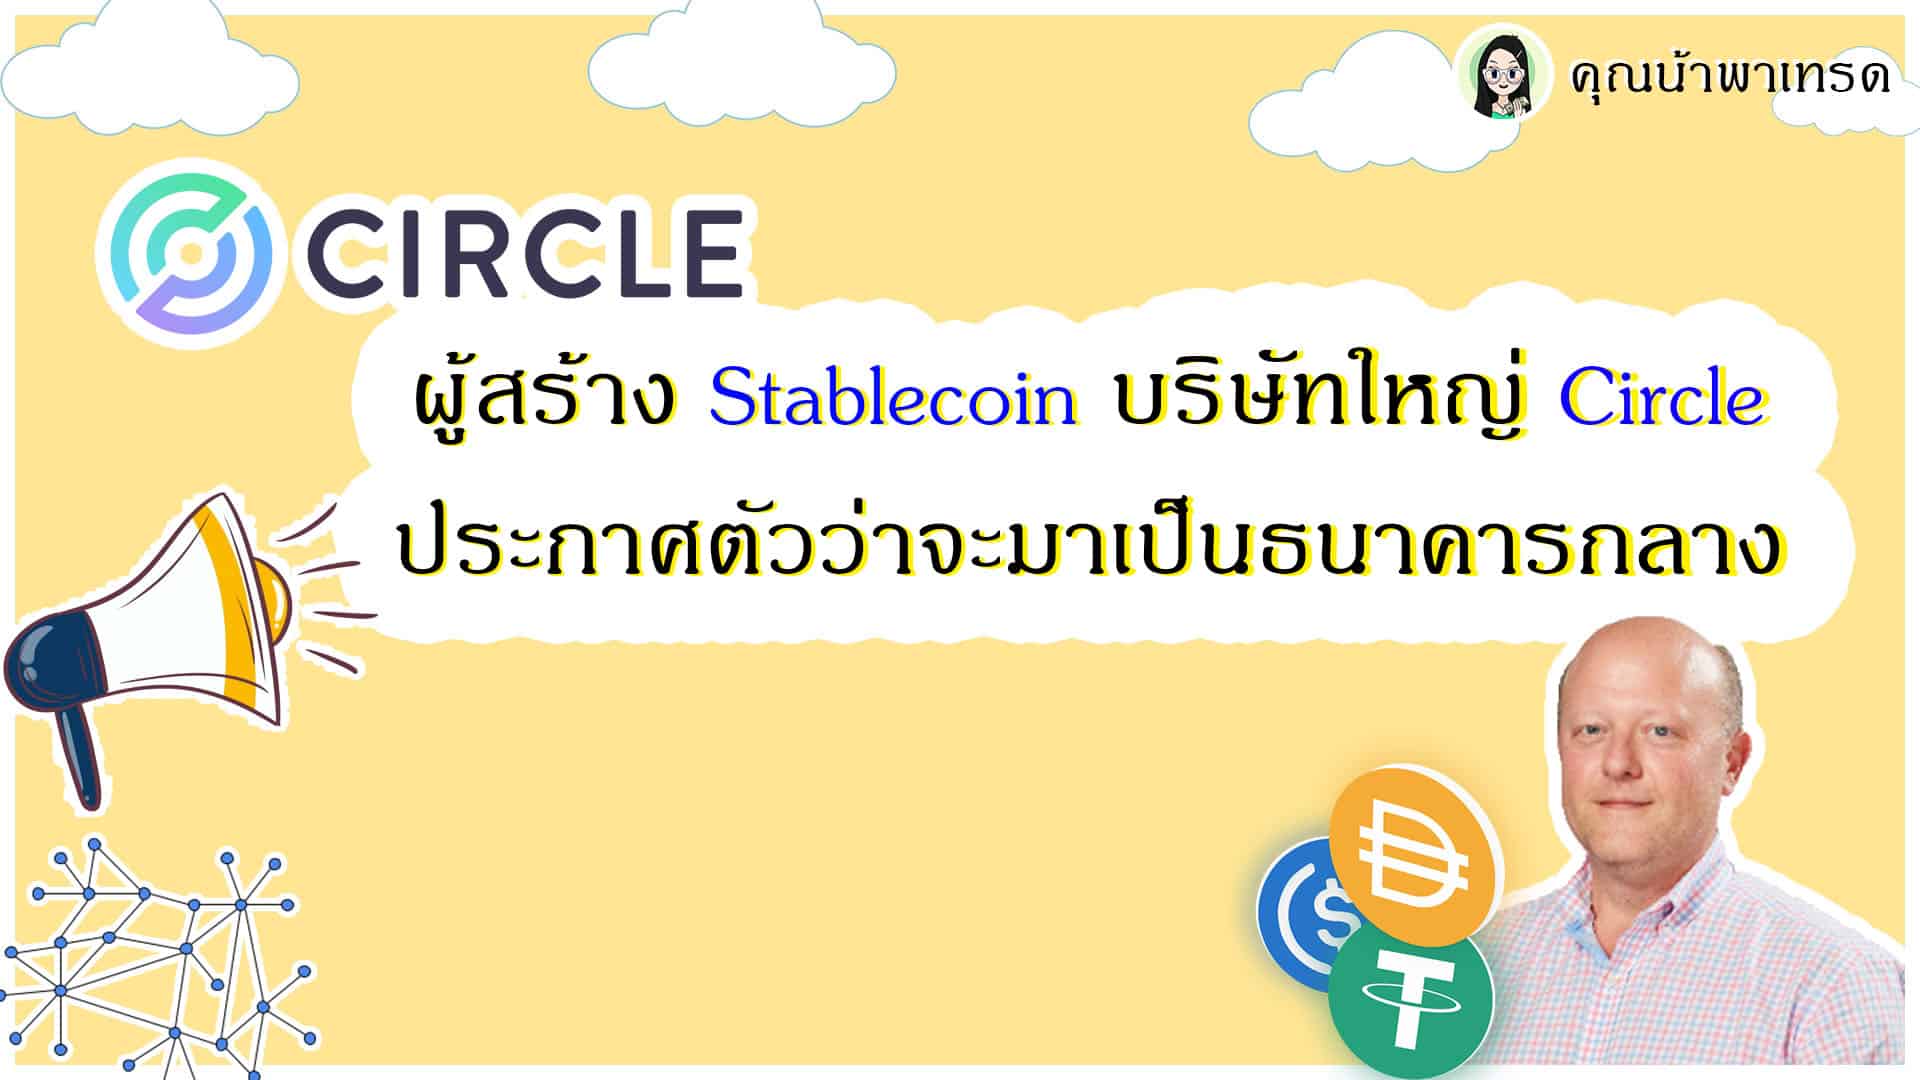 Stablecoin and Cercle